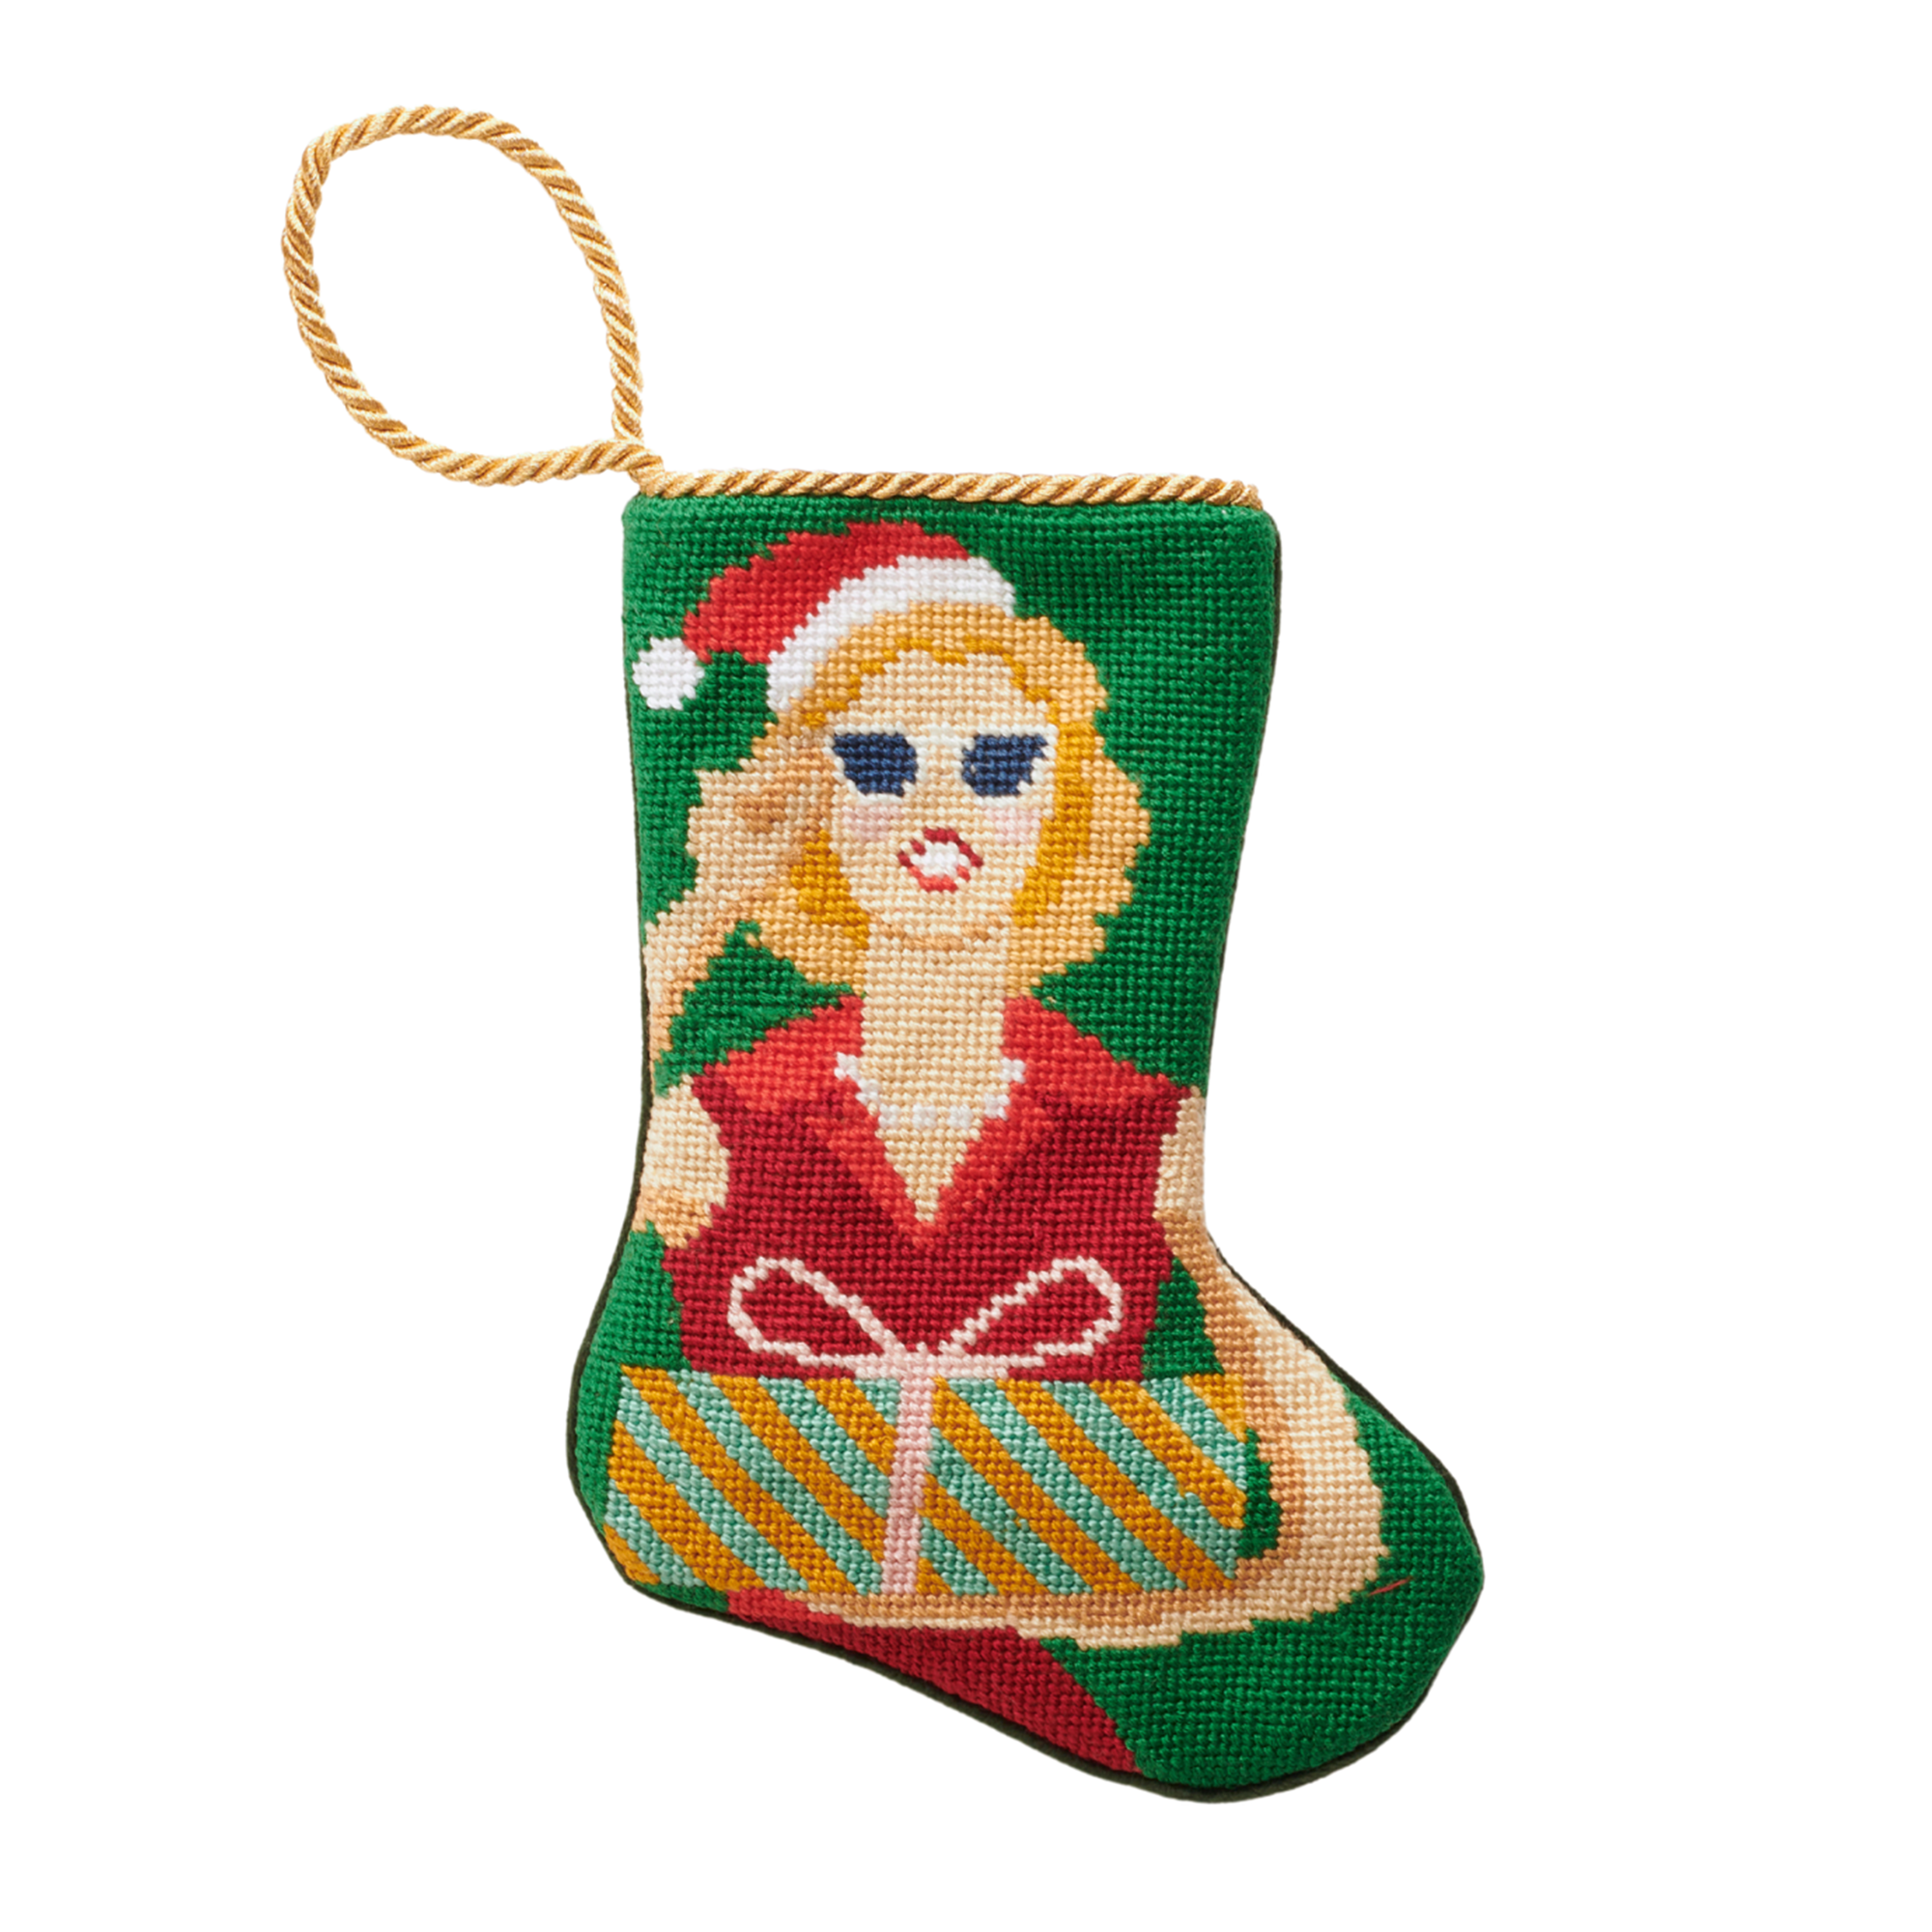 A small, intricately designed needlepoint stocking featuring a stylish and glamorous depiction of Mrs. Claus. The vibrant illustration is set against a festive background, highlighting her chic holiday attire. A gold loop at the top makes it perfect as a tree ornament, place setting, or for hanging by the fireplace.